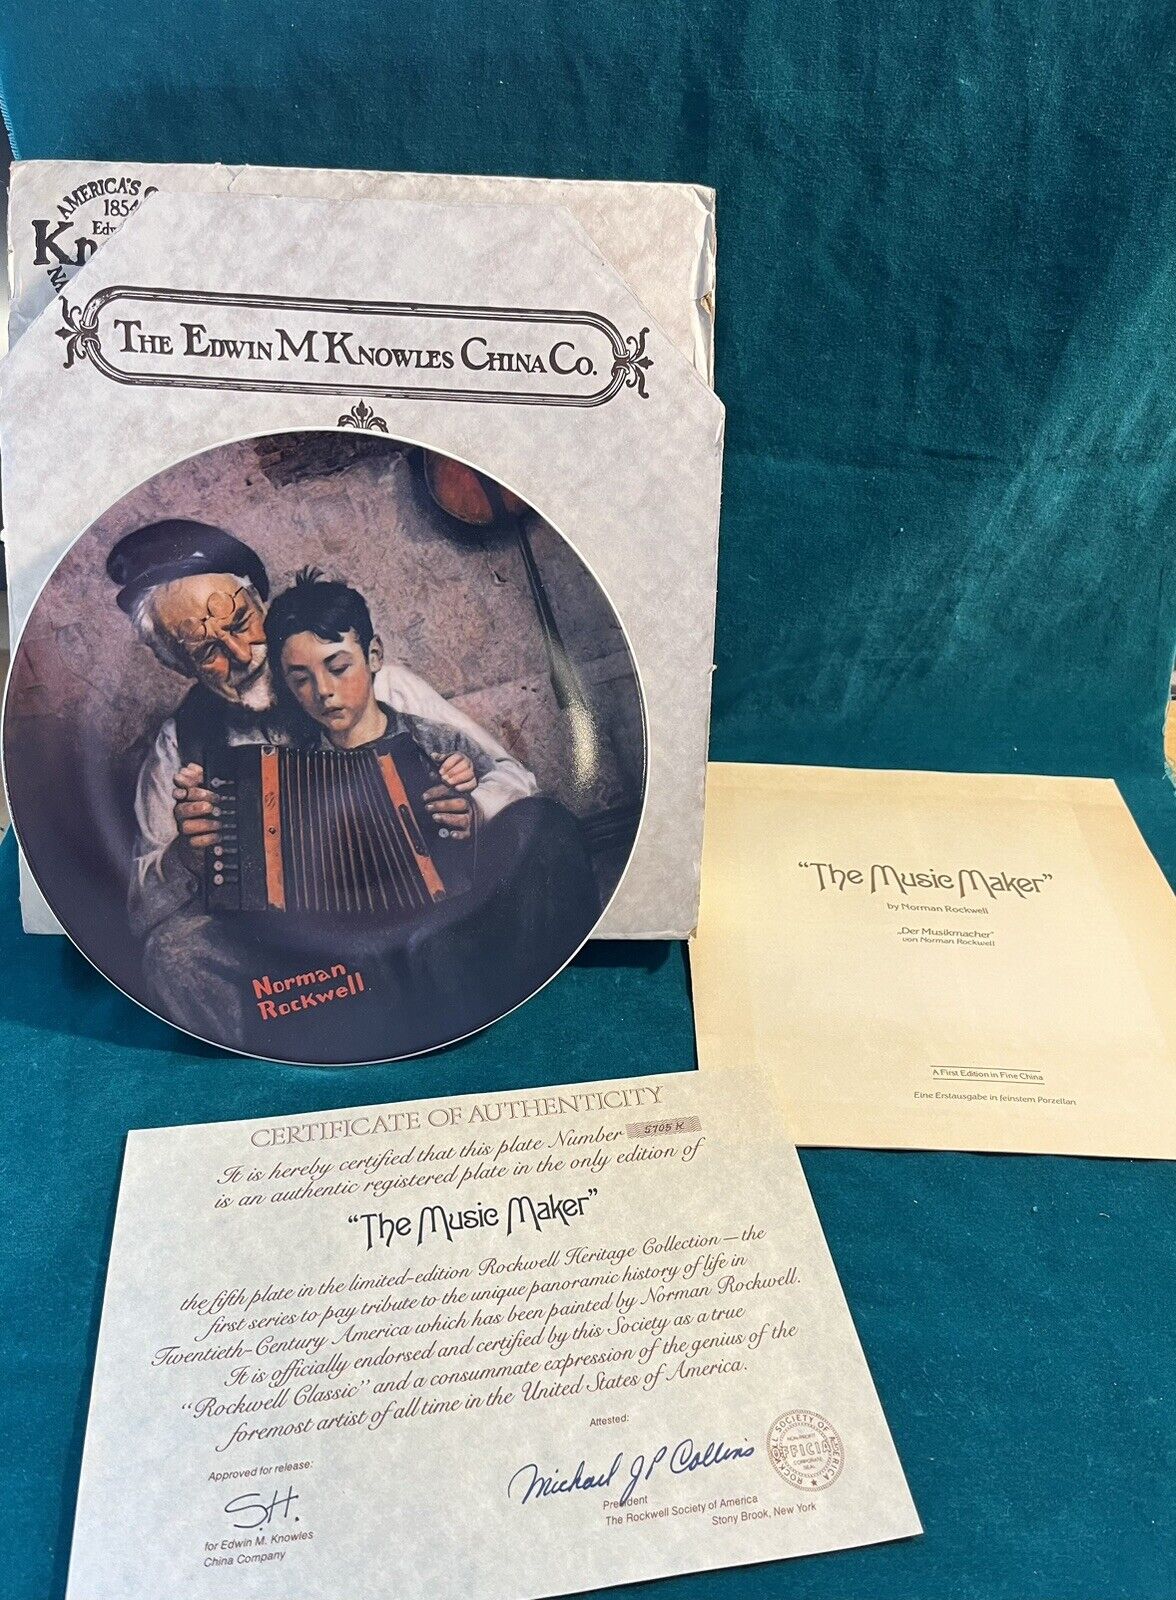 Knowles Norman Rockwell Plate 